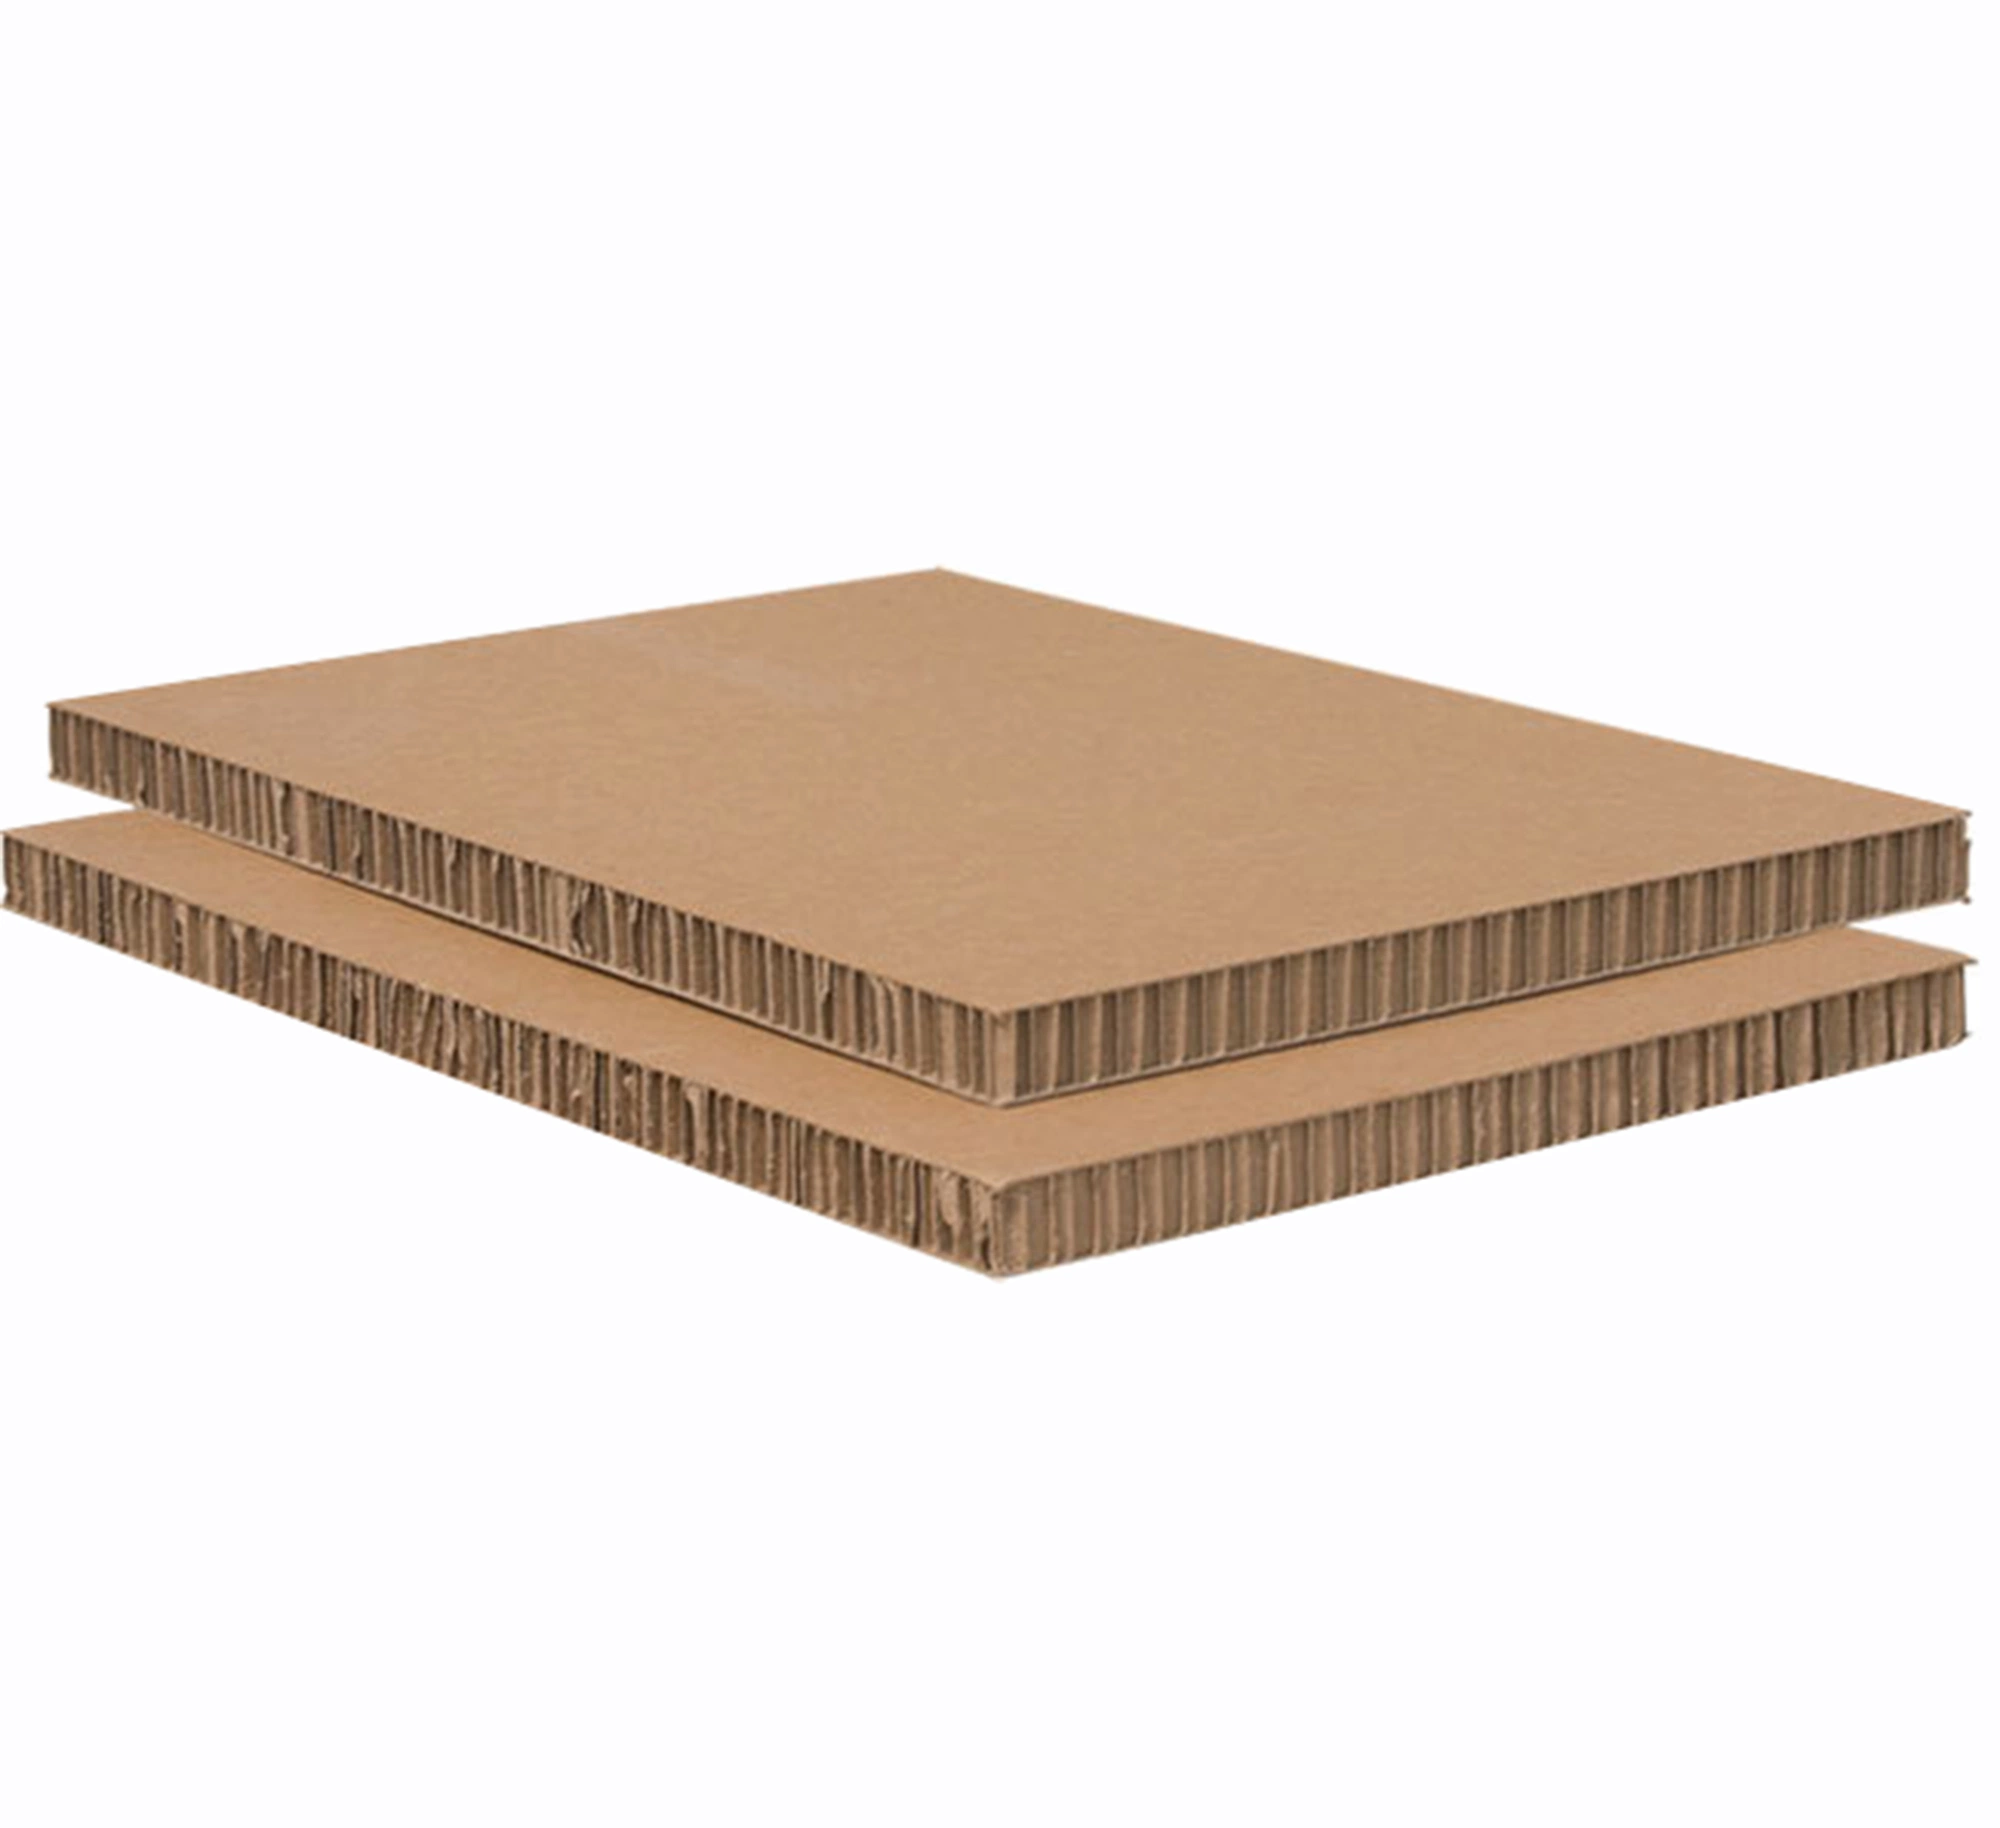 0 Plastic Strong Vertical Corrugated Board Paper Cardboard Used for Furniture and Display Stand